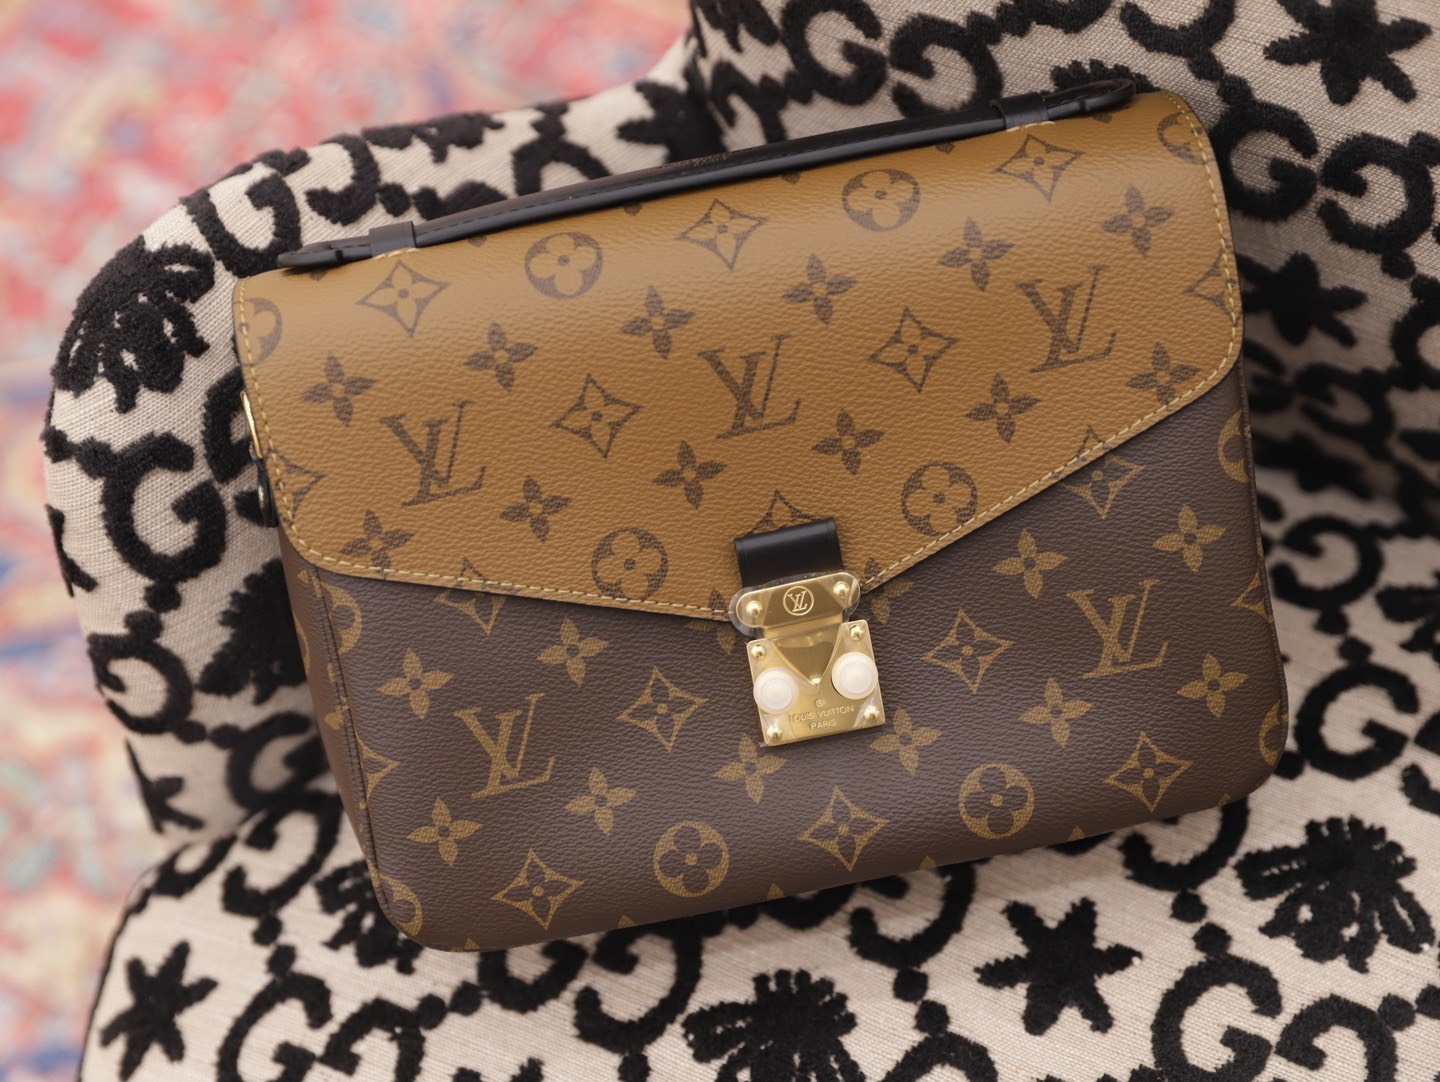 Louis Vuitton Bags Timeless Appeal (1)